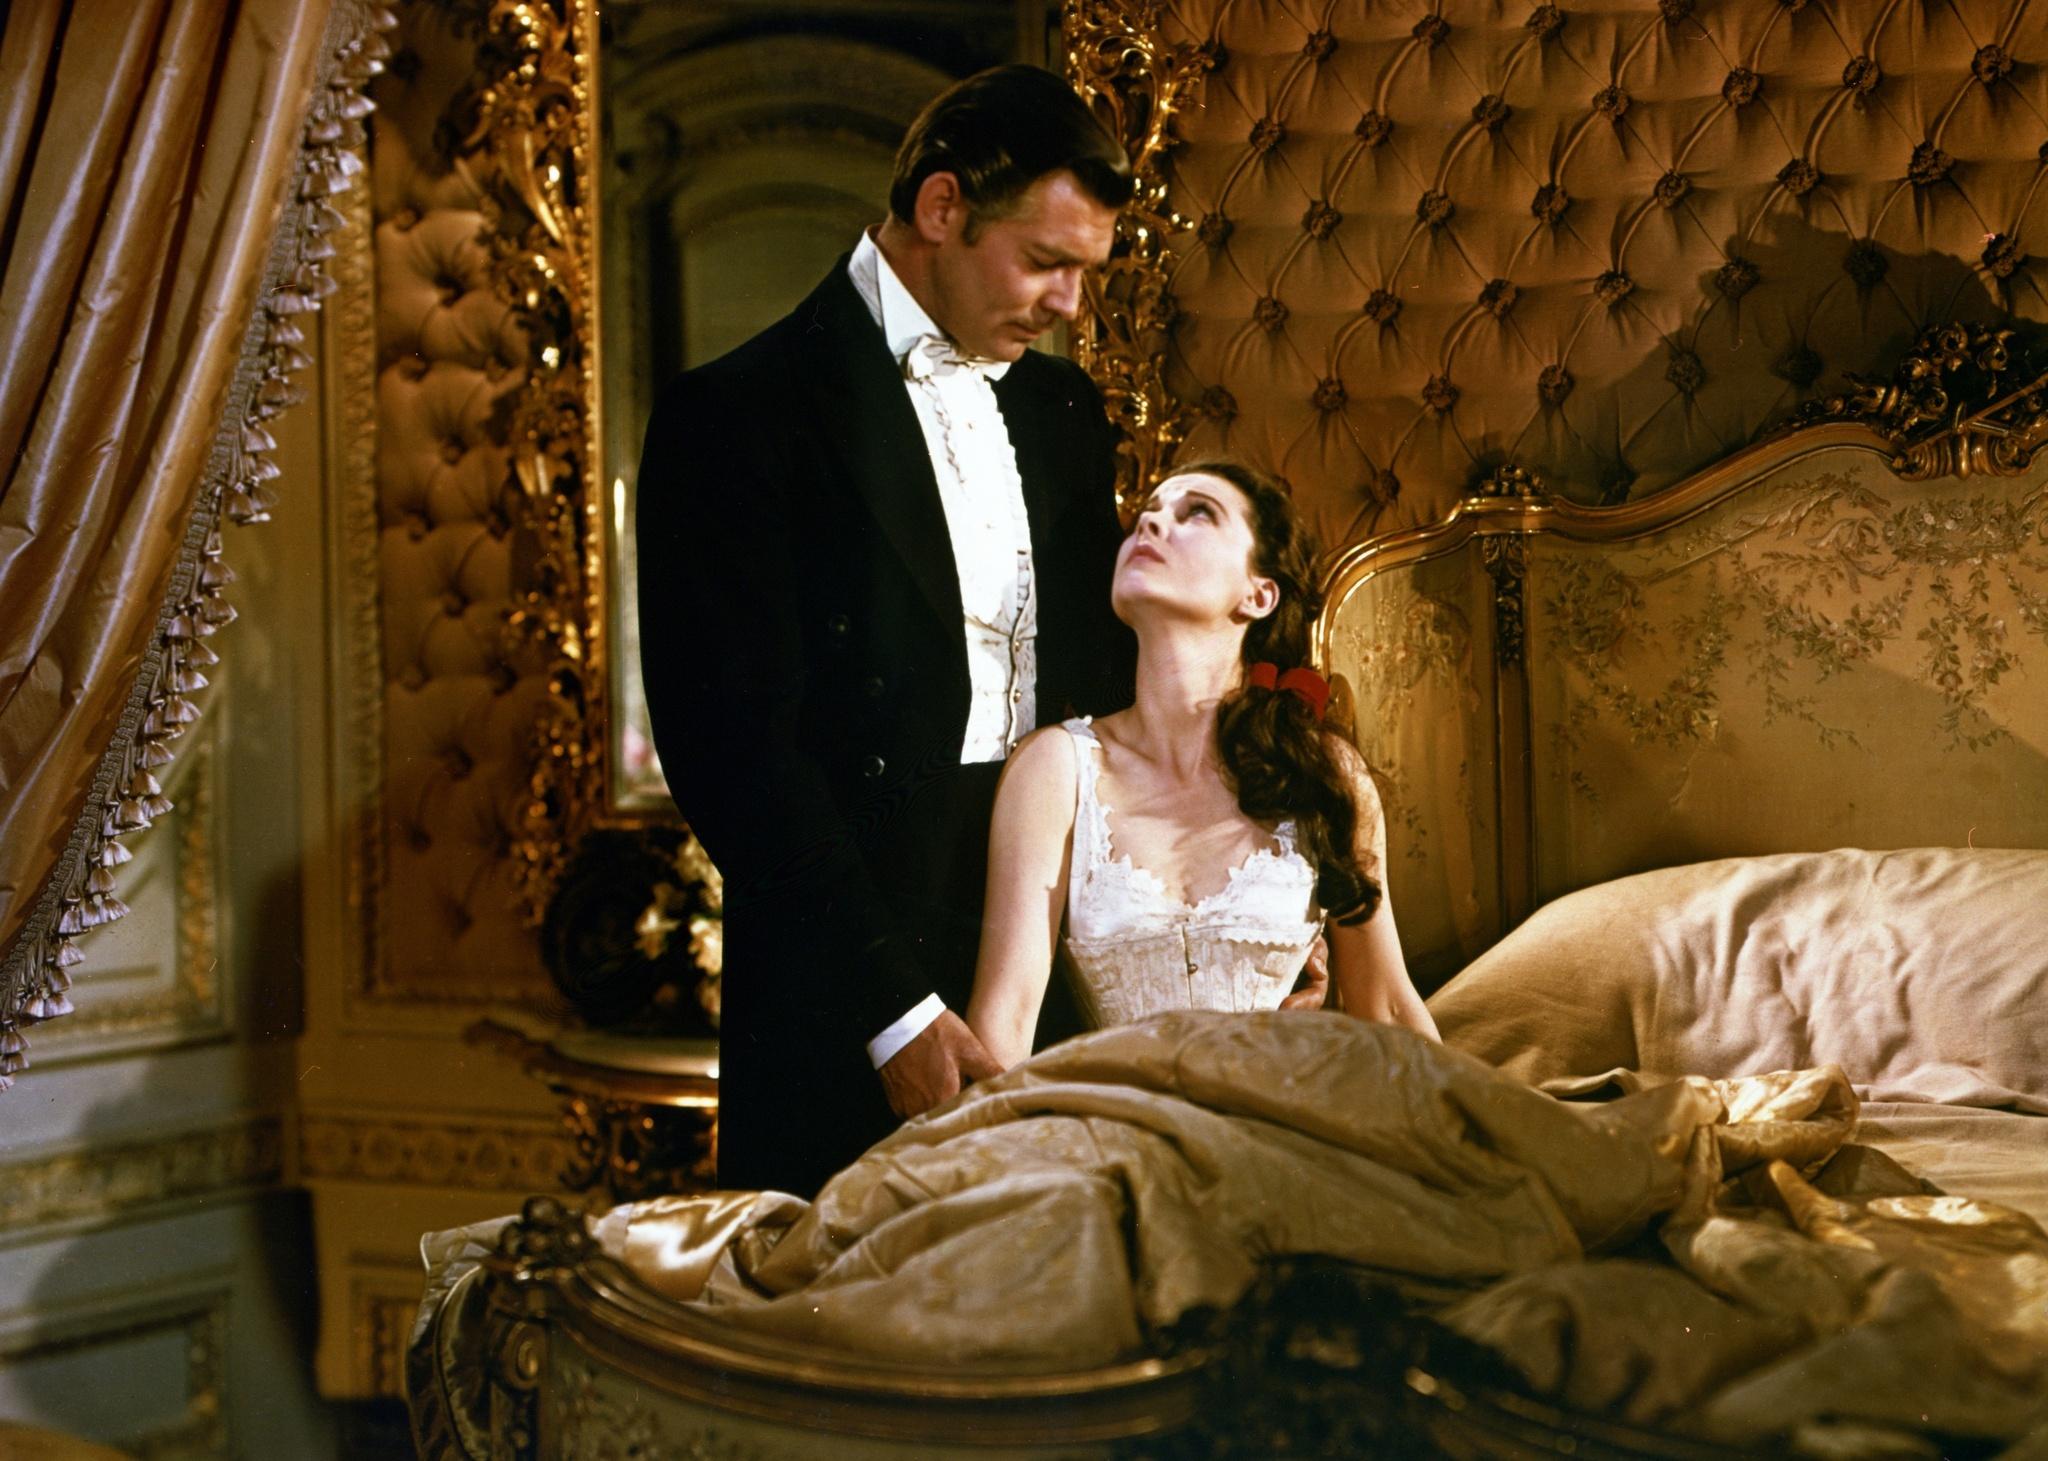 Actors Clark Gable and Vivien Leigh in a scene from ‘Gone with the Wind’